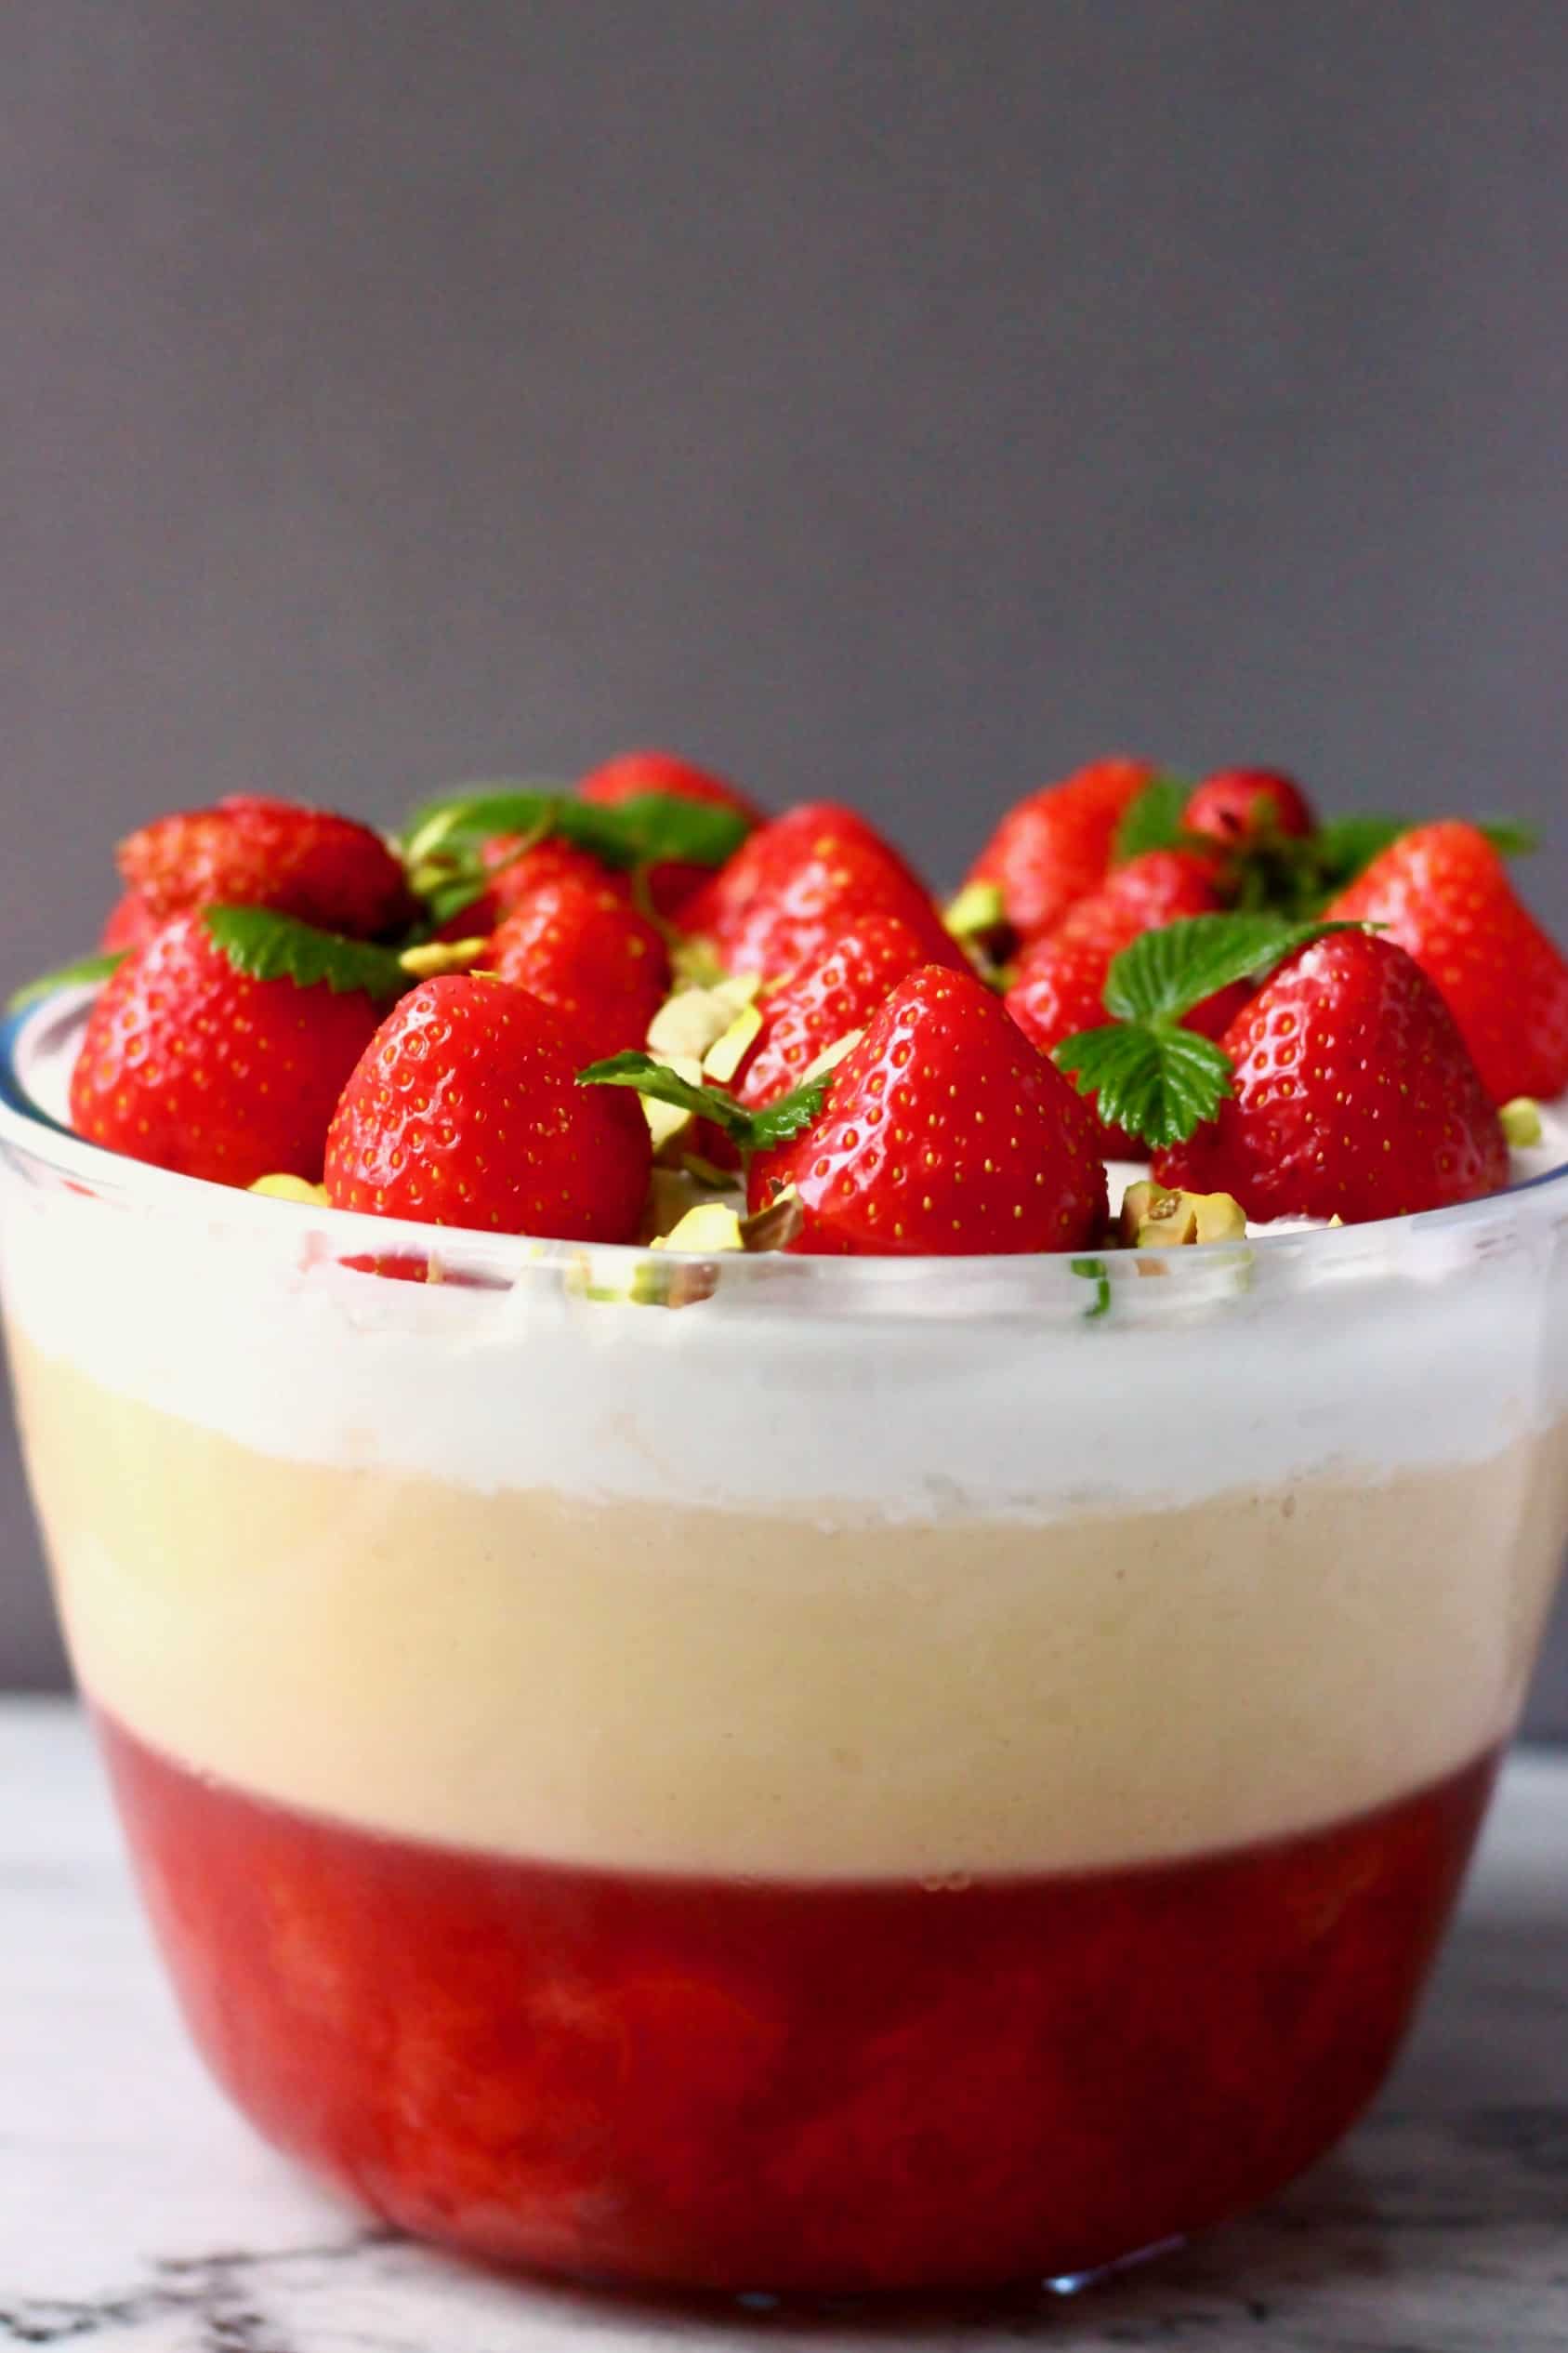 Vegan strawberry trifle with strawberry jelly, custard, cream and fresh strawberries in a glass bowl